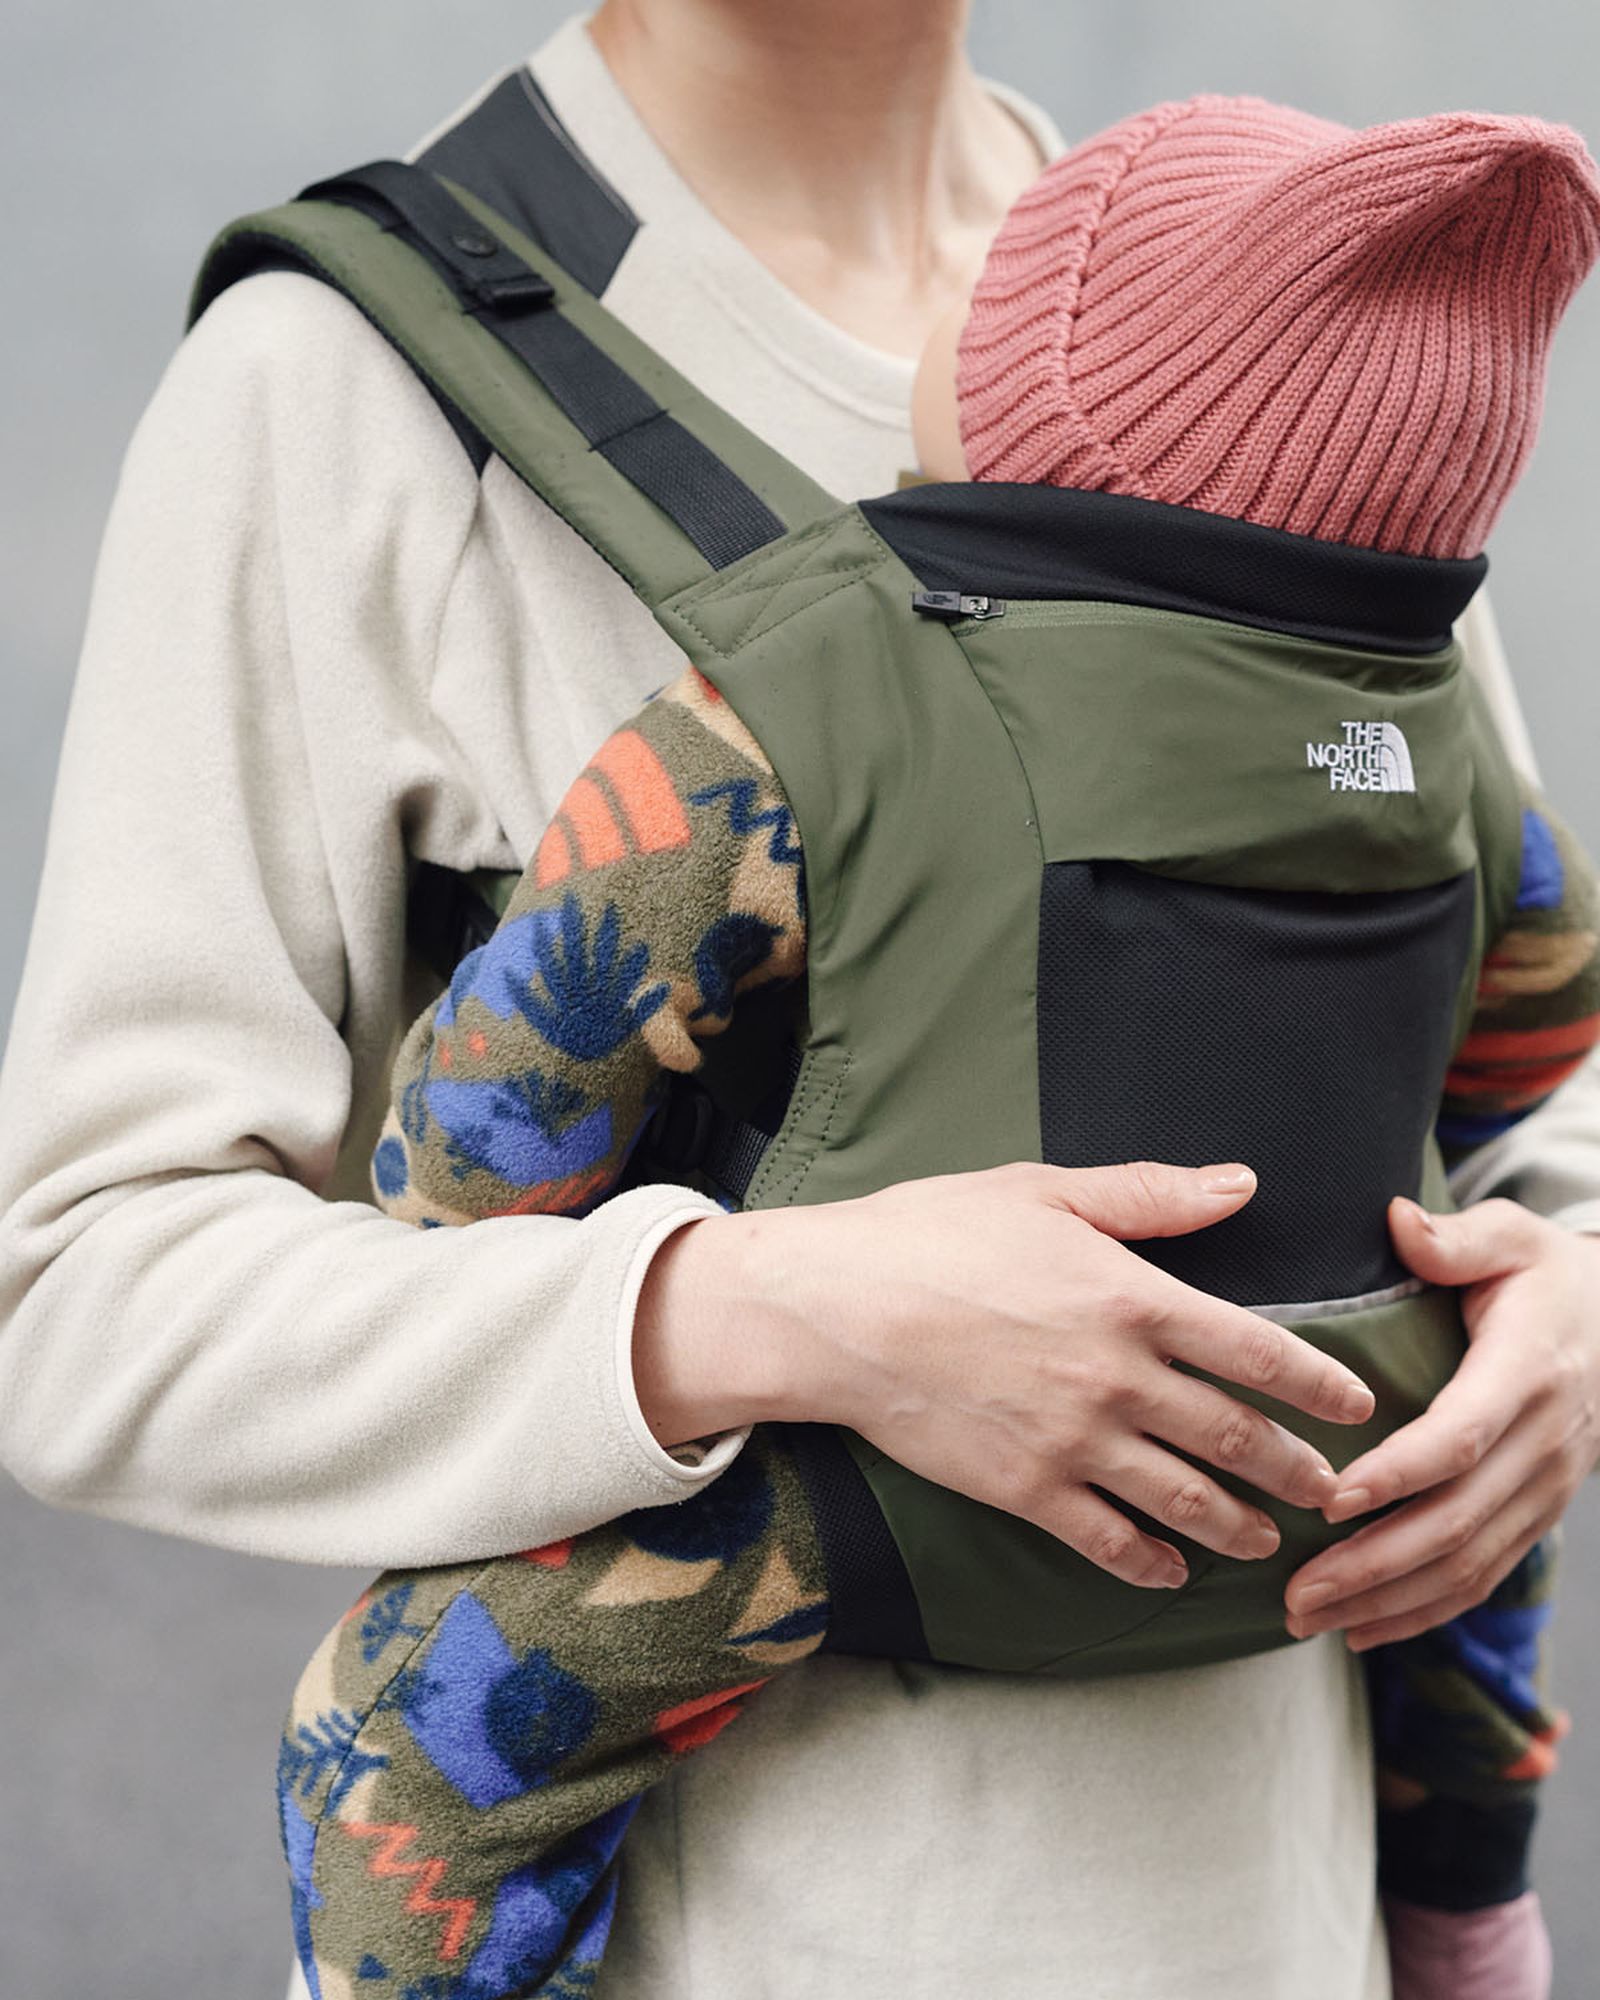 the-north-face-baby-carrier-05